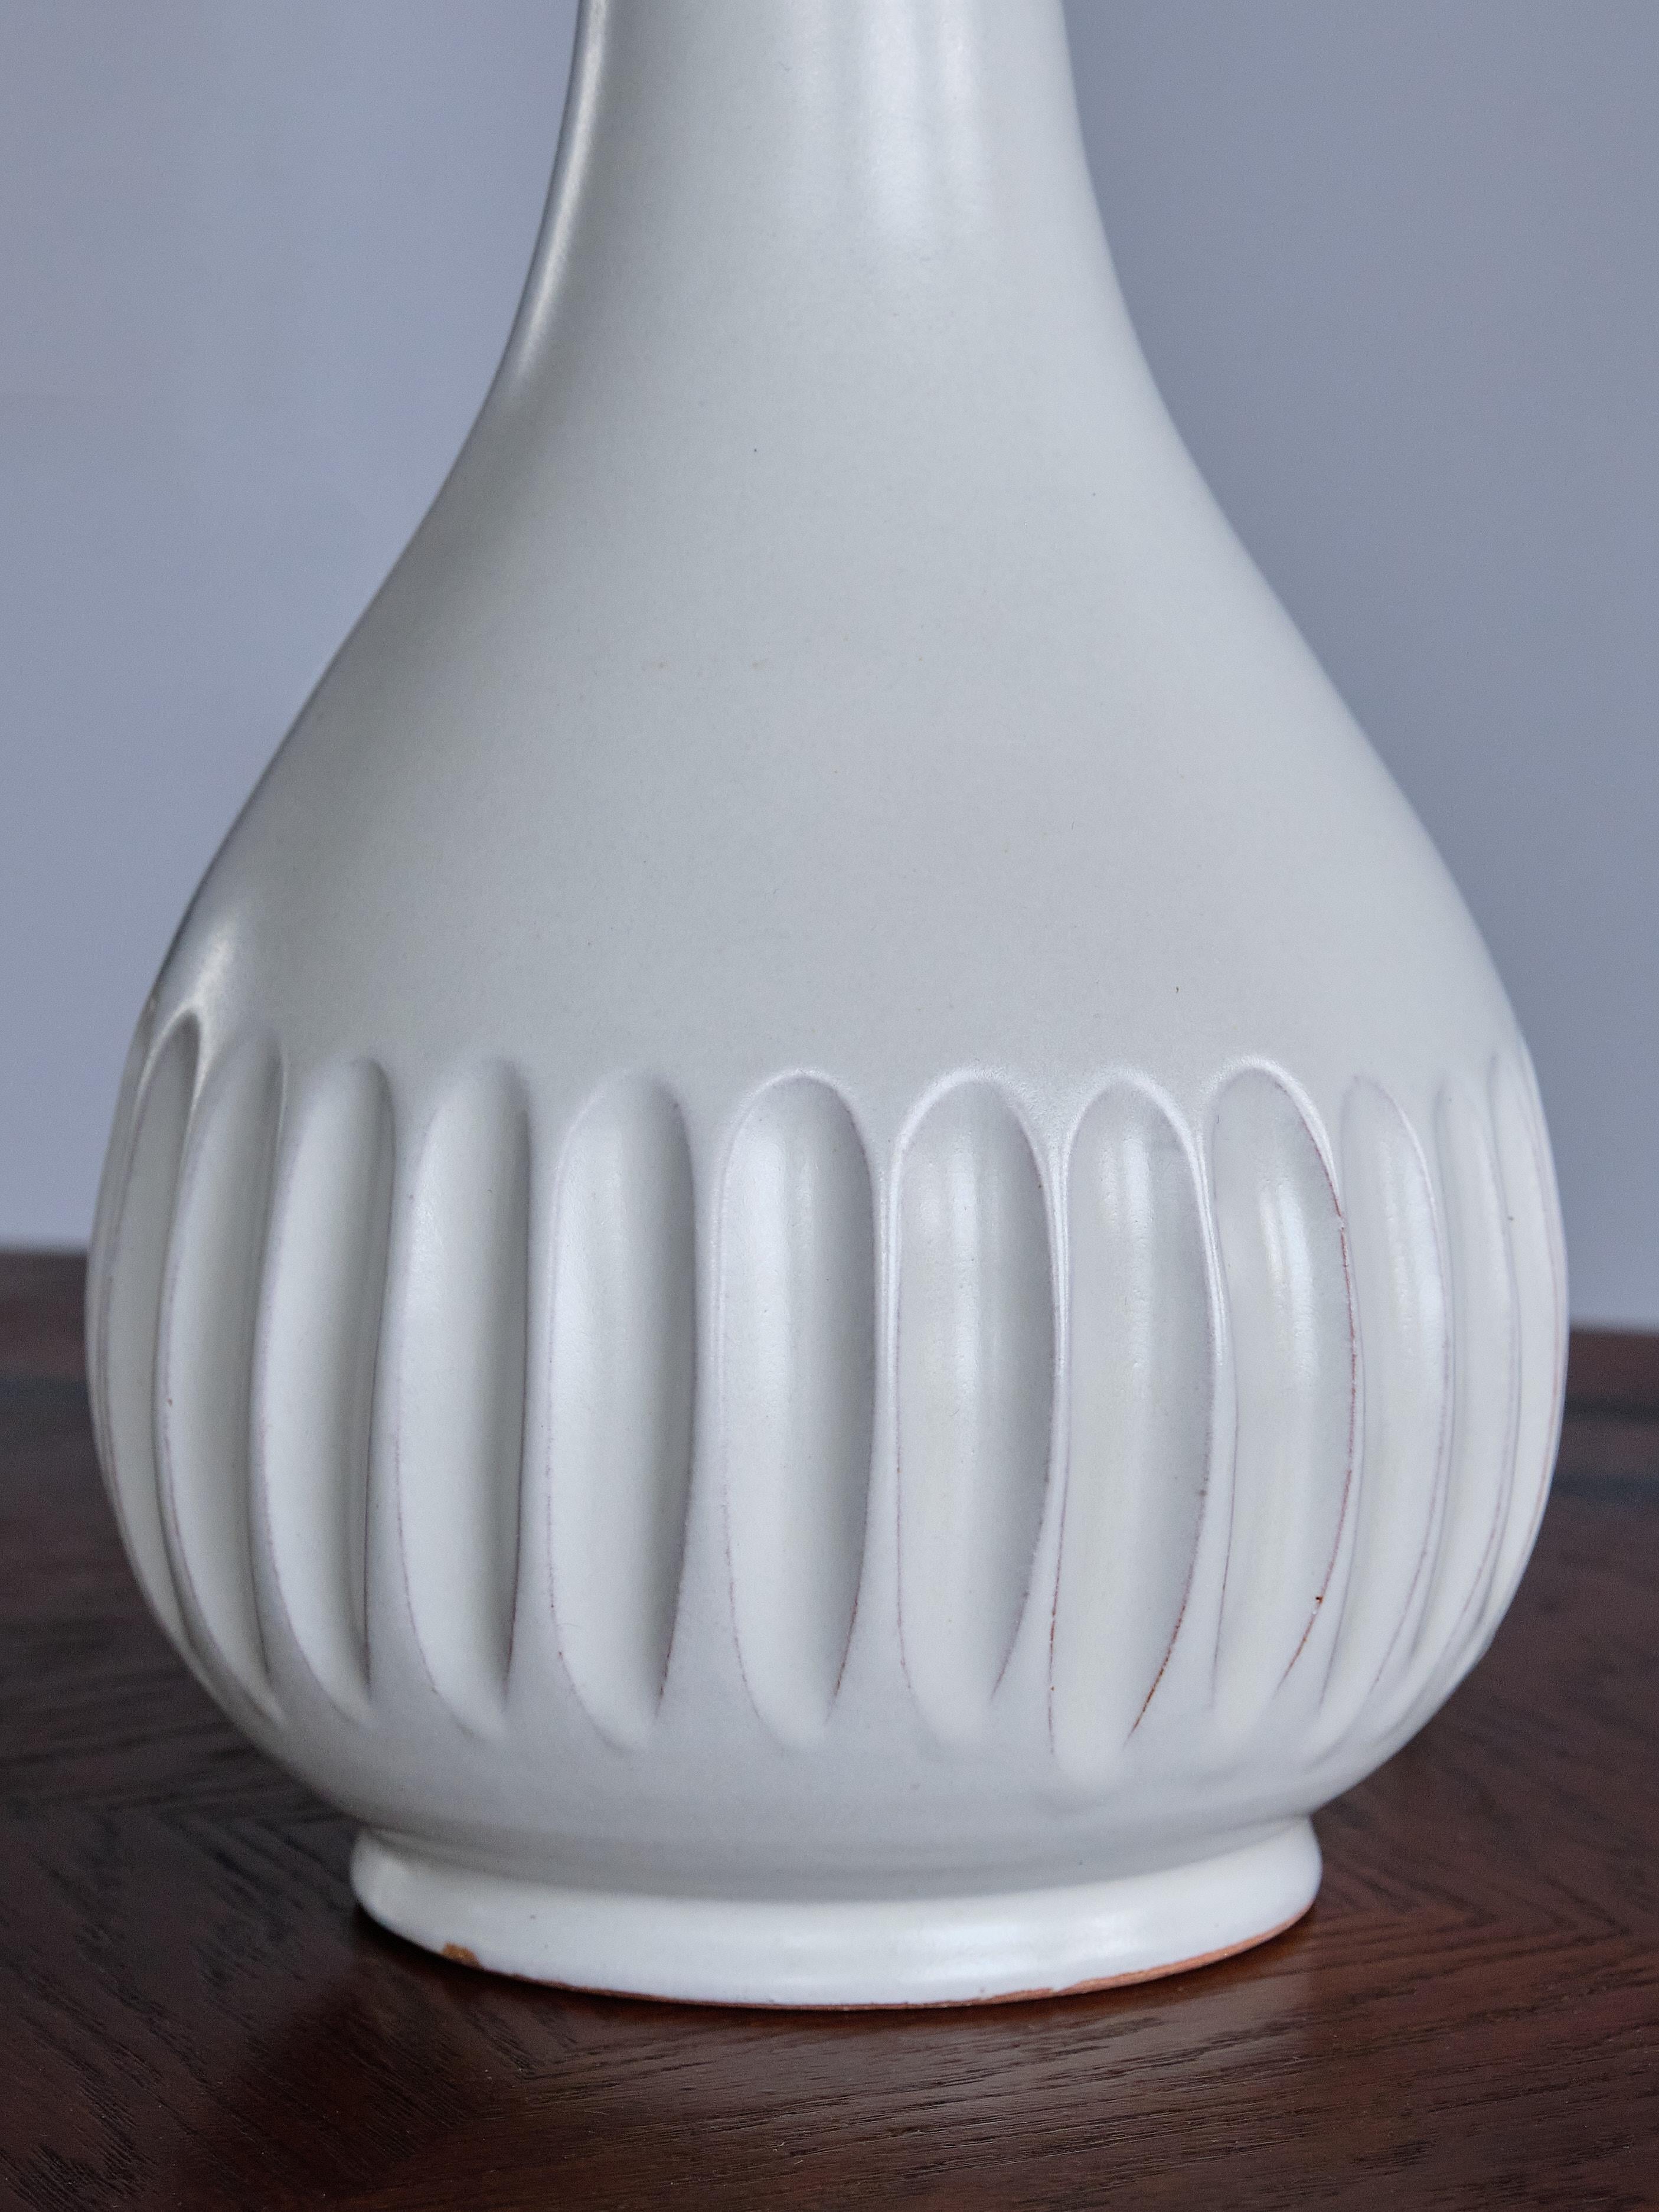 Anna-Lisa Thomson Ceramic Table Lamp, Upsala-Ekeby, Swedish Modern, 1940s In Good Condition For Sale In The Hague, NL